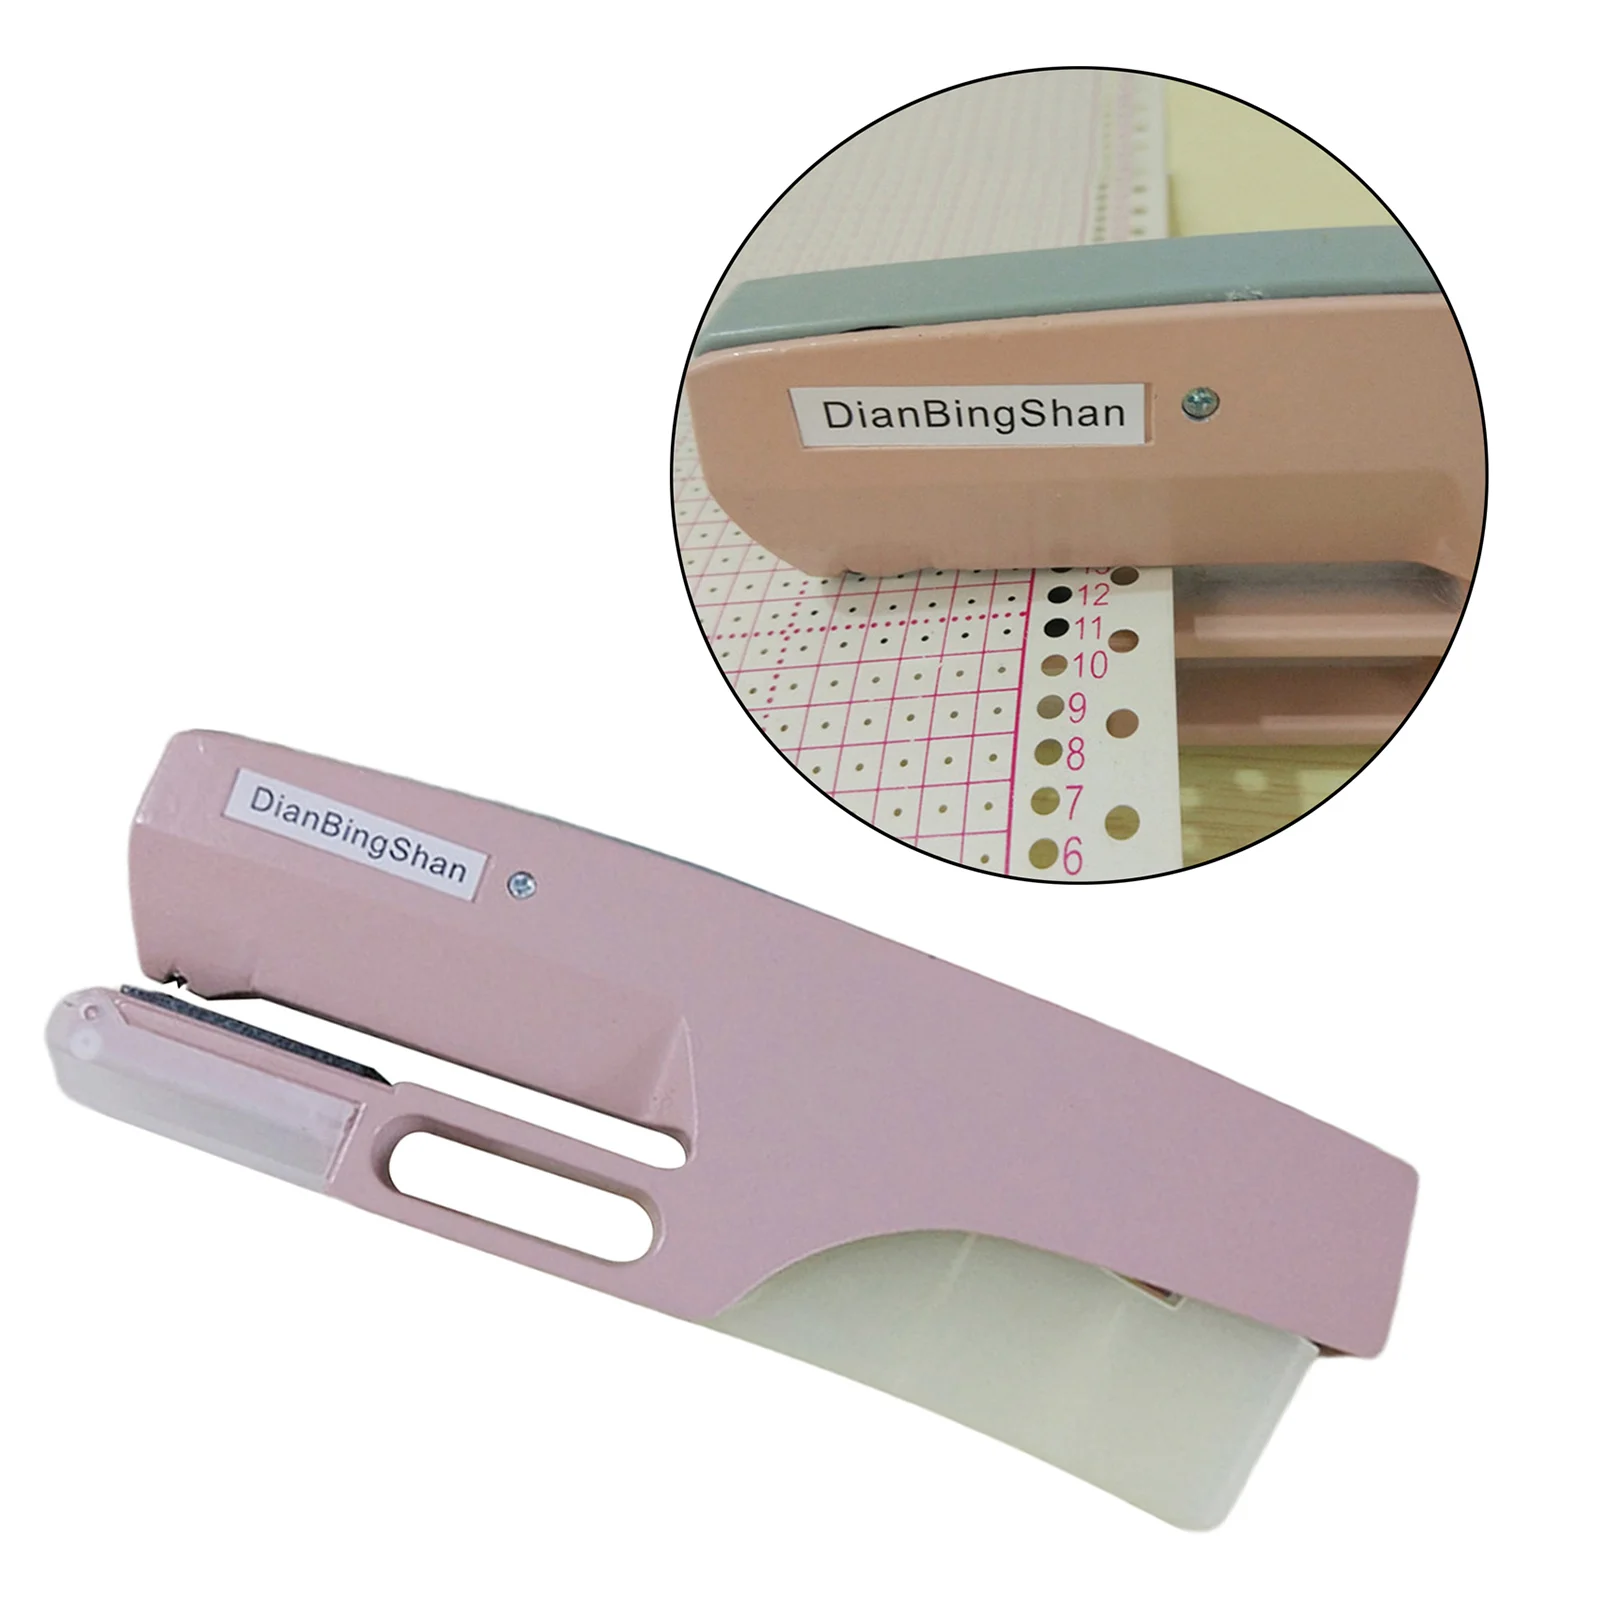 Hole Punch for PVC Card Heavy Duty Single Round Hole Puncher DIY Hand Tools for Punch Cards Home Office School Supplies Crafts